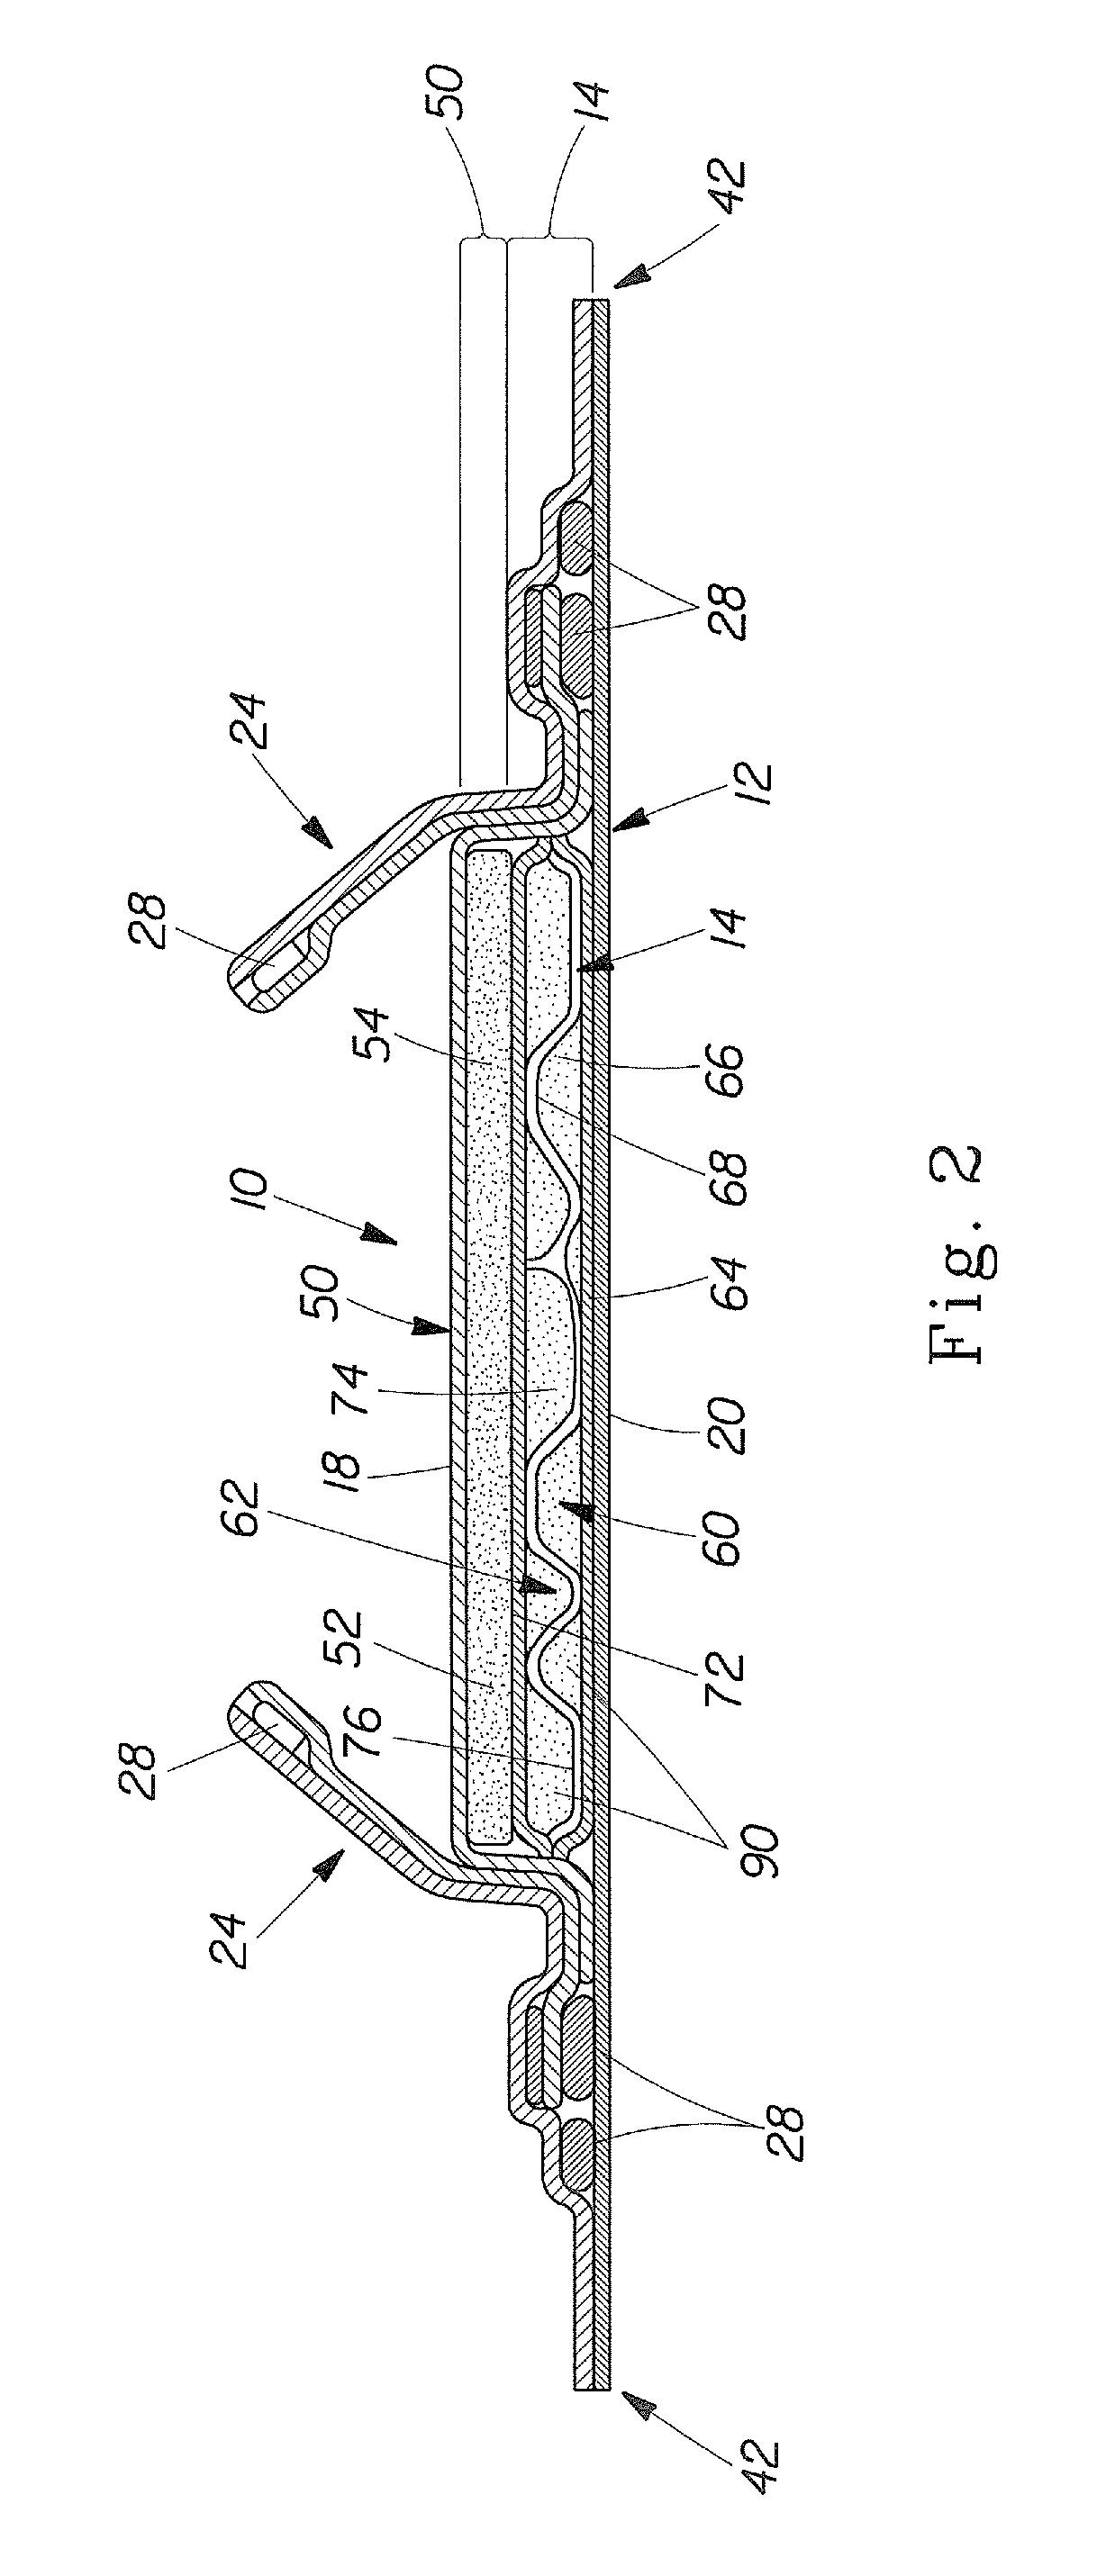 Disposable Absorbent Article With Substantially Continuously Distributed Absorbent Particulate Polymer Material And Method